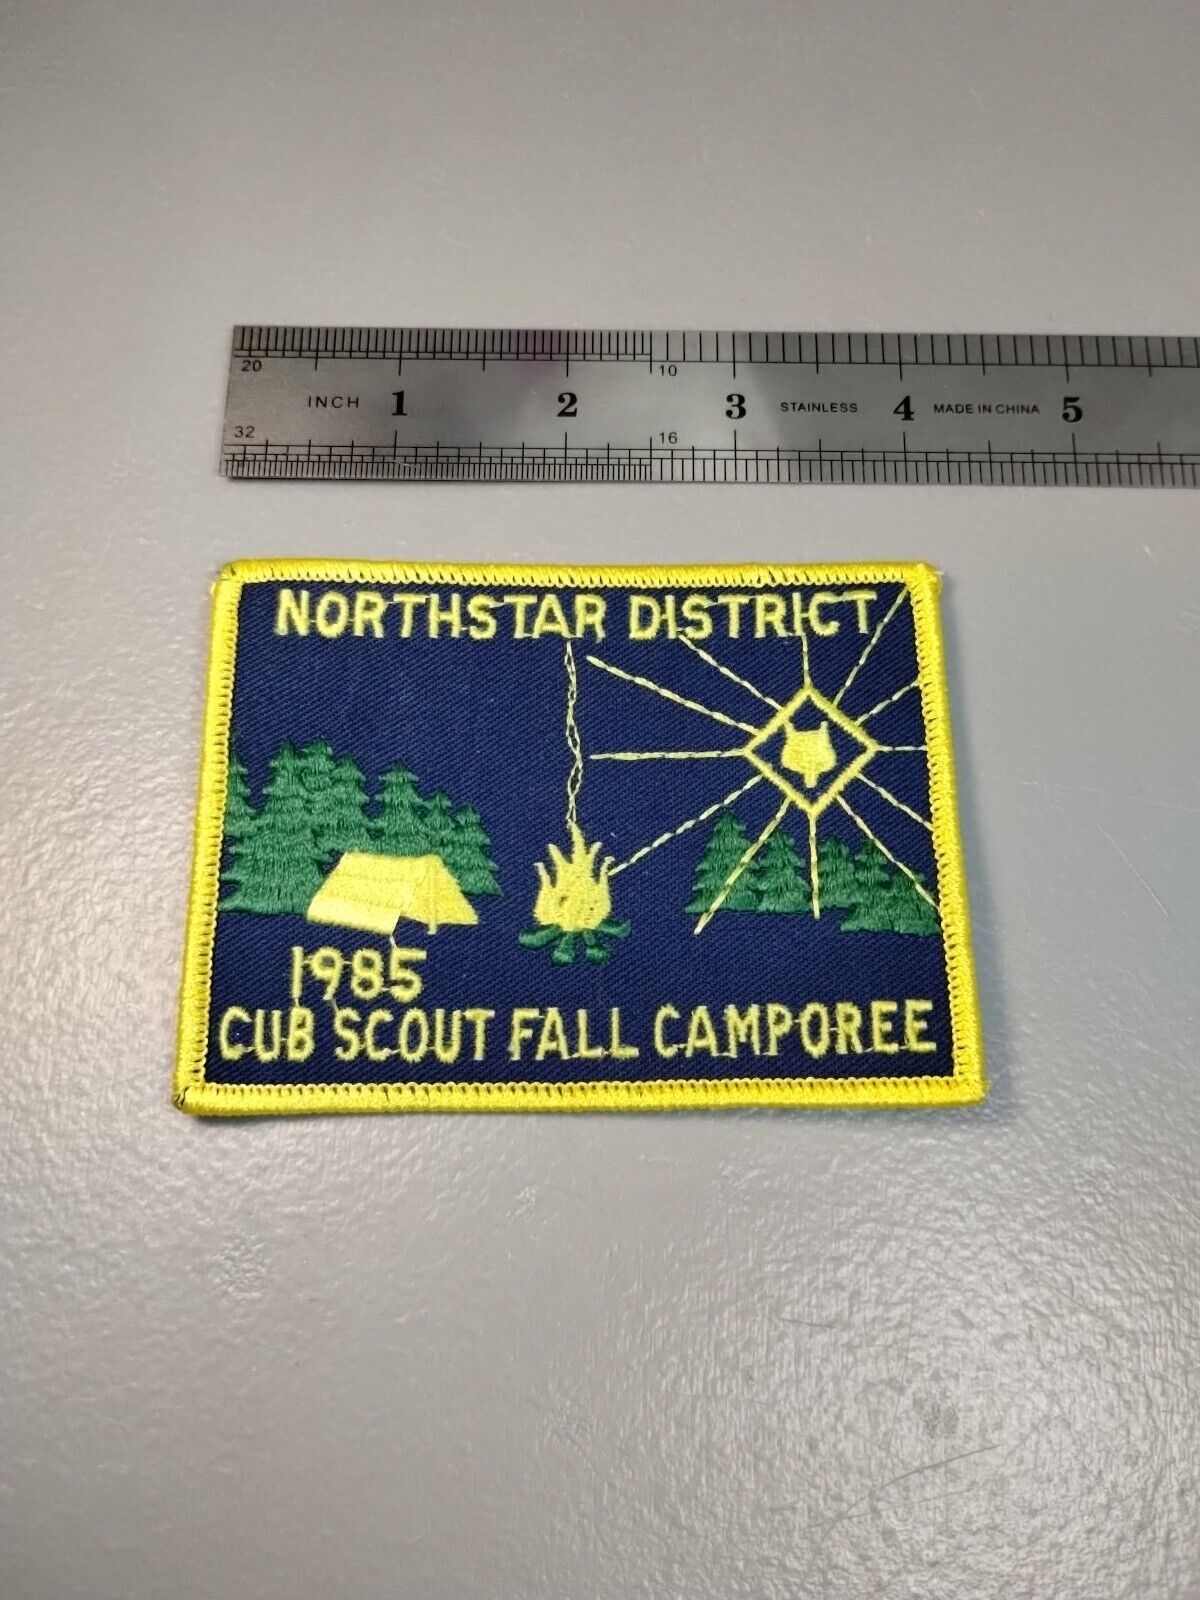 Vintage 1985 Northstar District Cub Scout Fall Camporee Patch VG+ (A3)